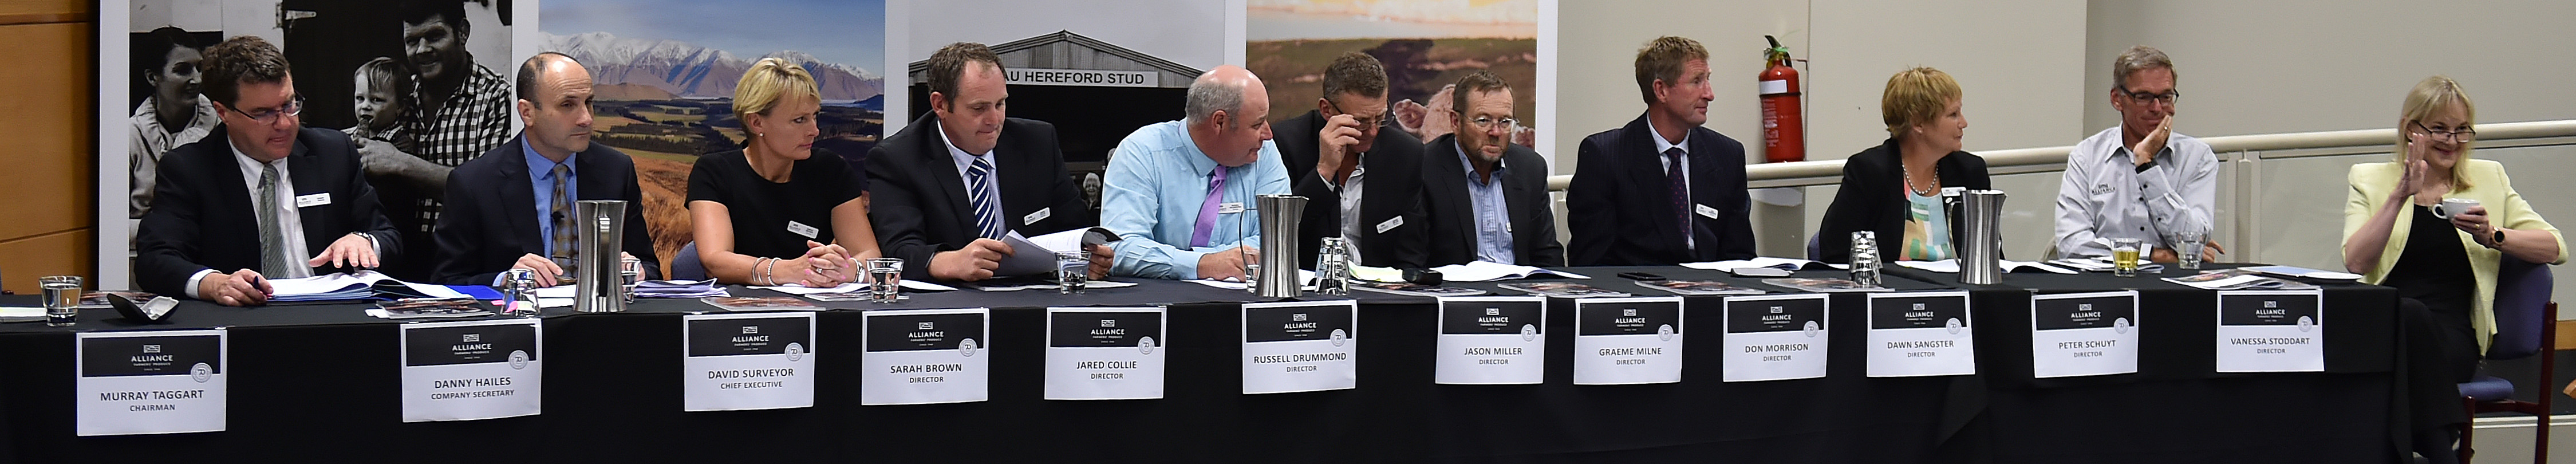 Watching proceedings at Alliance Group's annual meeting at Otago Museum yesterday are (from left) company secretary Danny Hailes, chief executive David Surveyor and directors Sarah Brown, Jared Collie, Russell Drummond, Jason Miller, Graeme Milne, Don Mor